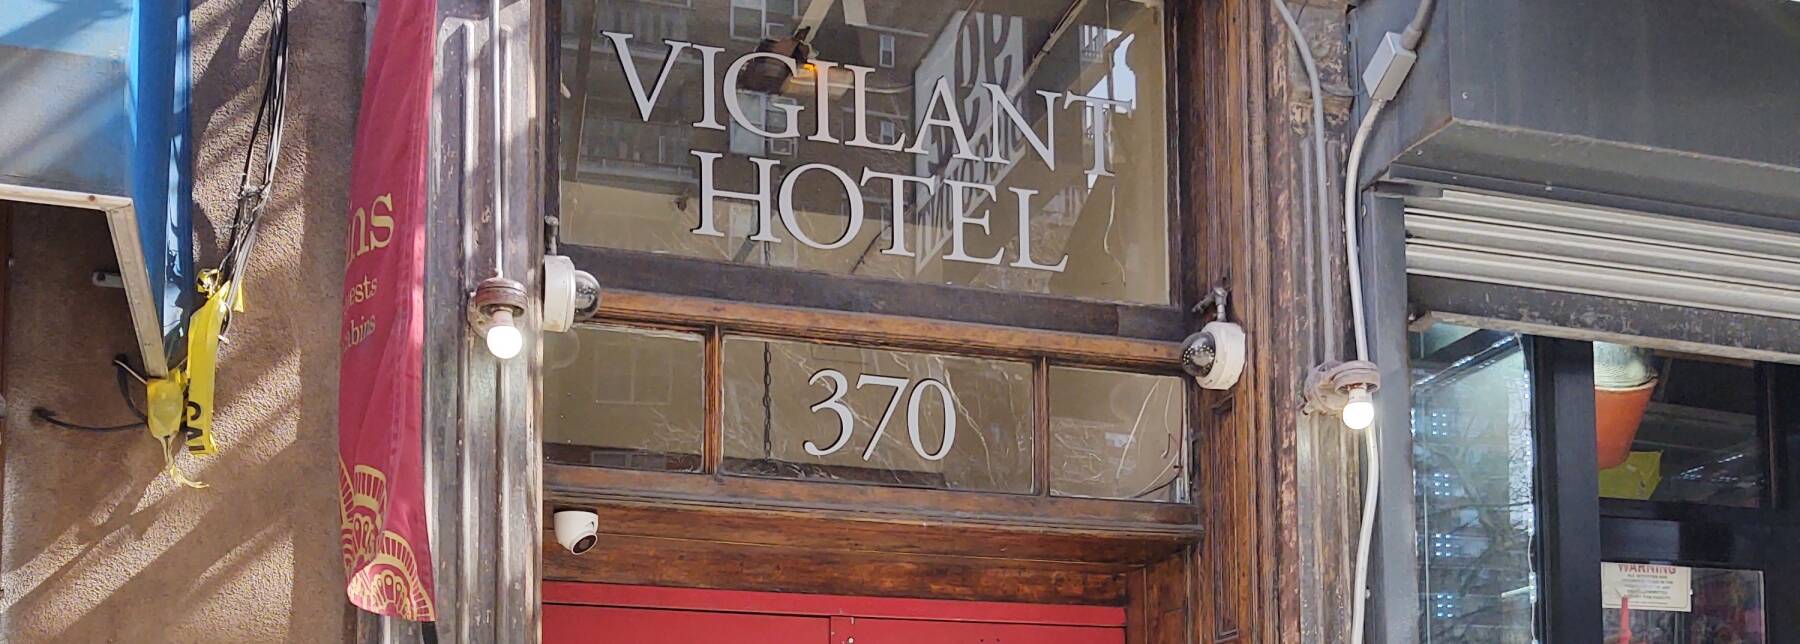 Entrance to the Vigilant Hotel in the northern Chelsea district.